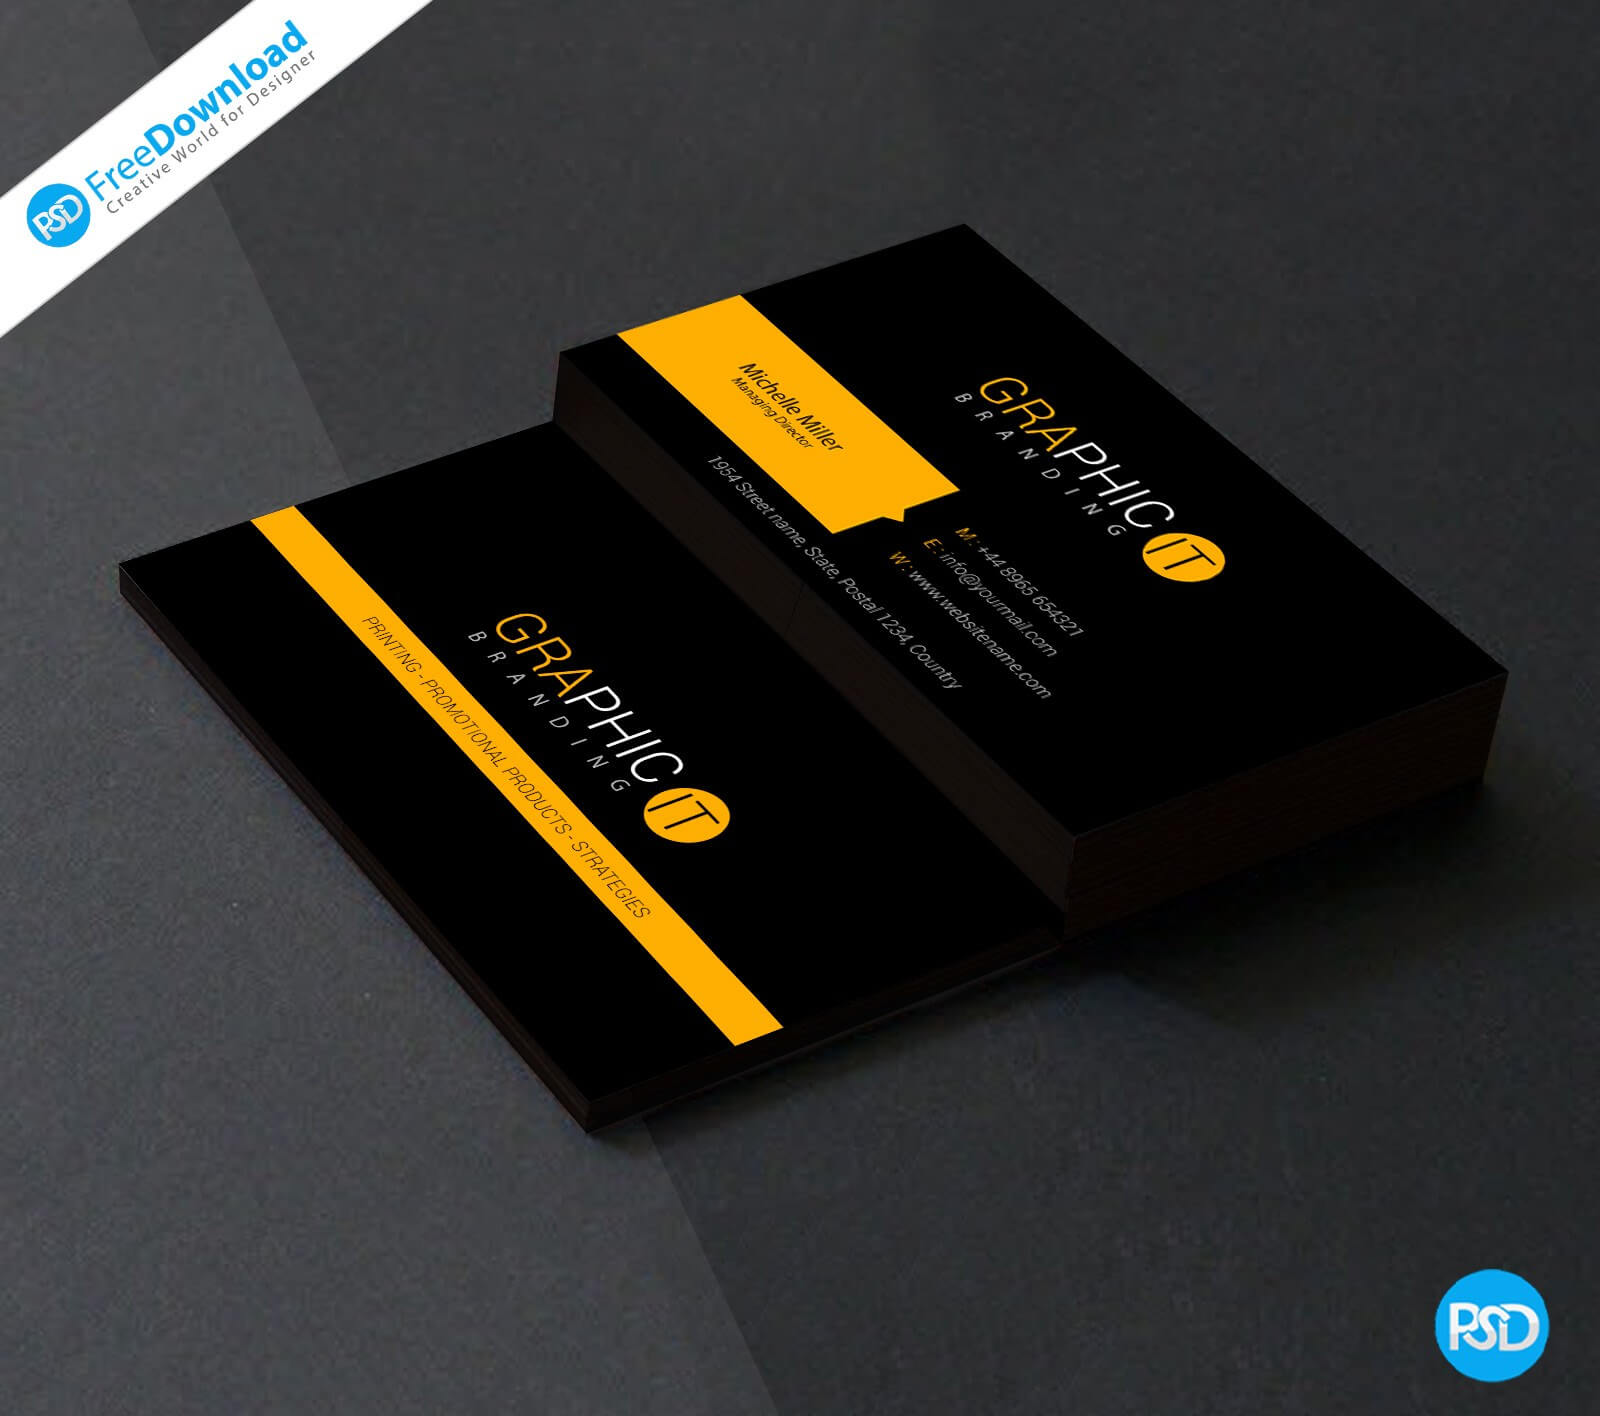 023 Professional Business Card Design Psd Blank Template Regarding Professional Business Card Templates Free Download